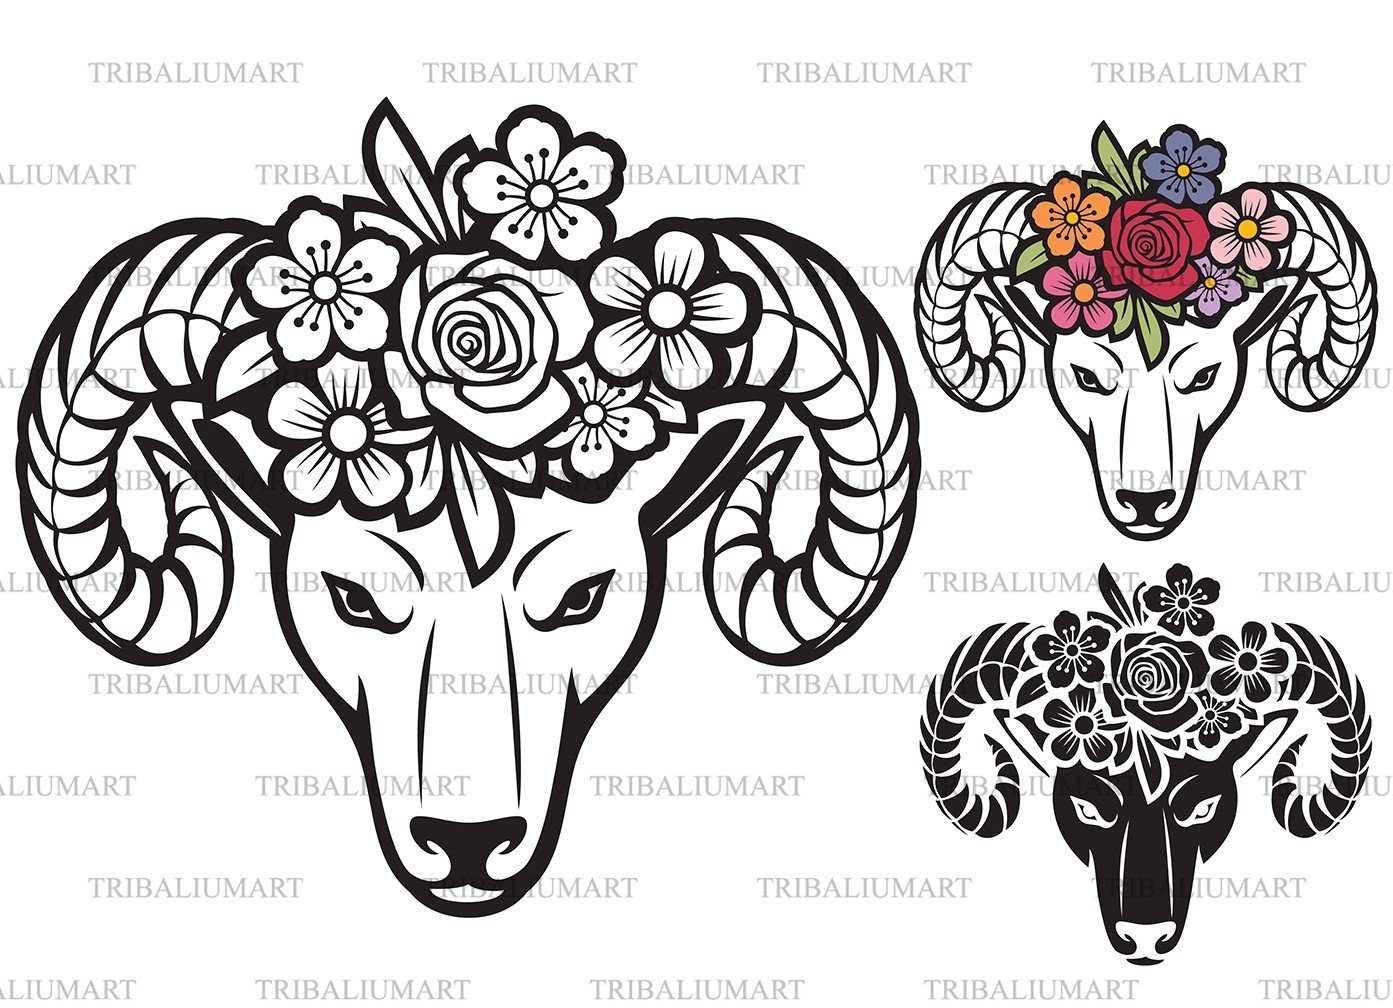 Download Ram Head With Flowers Floral Design Cut Files For Cricut Clip Art Silhouettes Eps Svg Pdf Png Dxf Jpeg So Fontsy